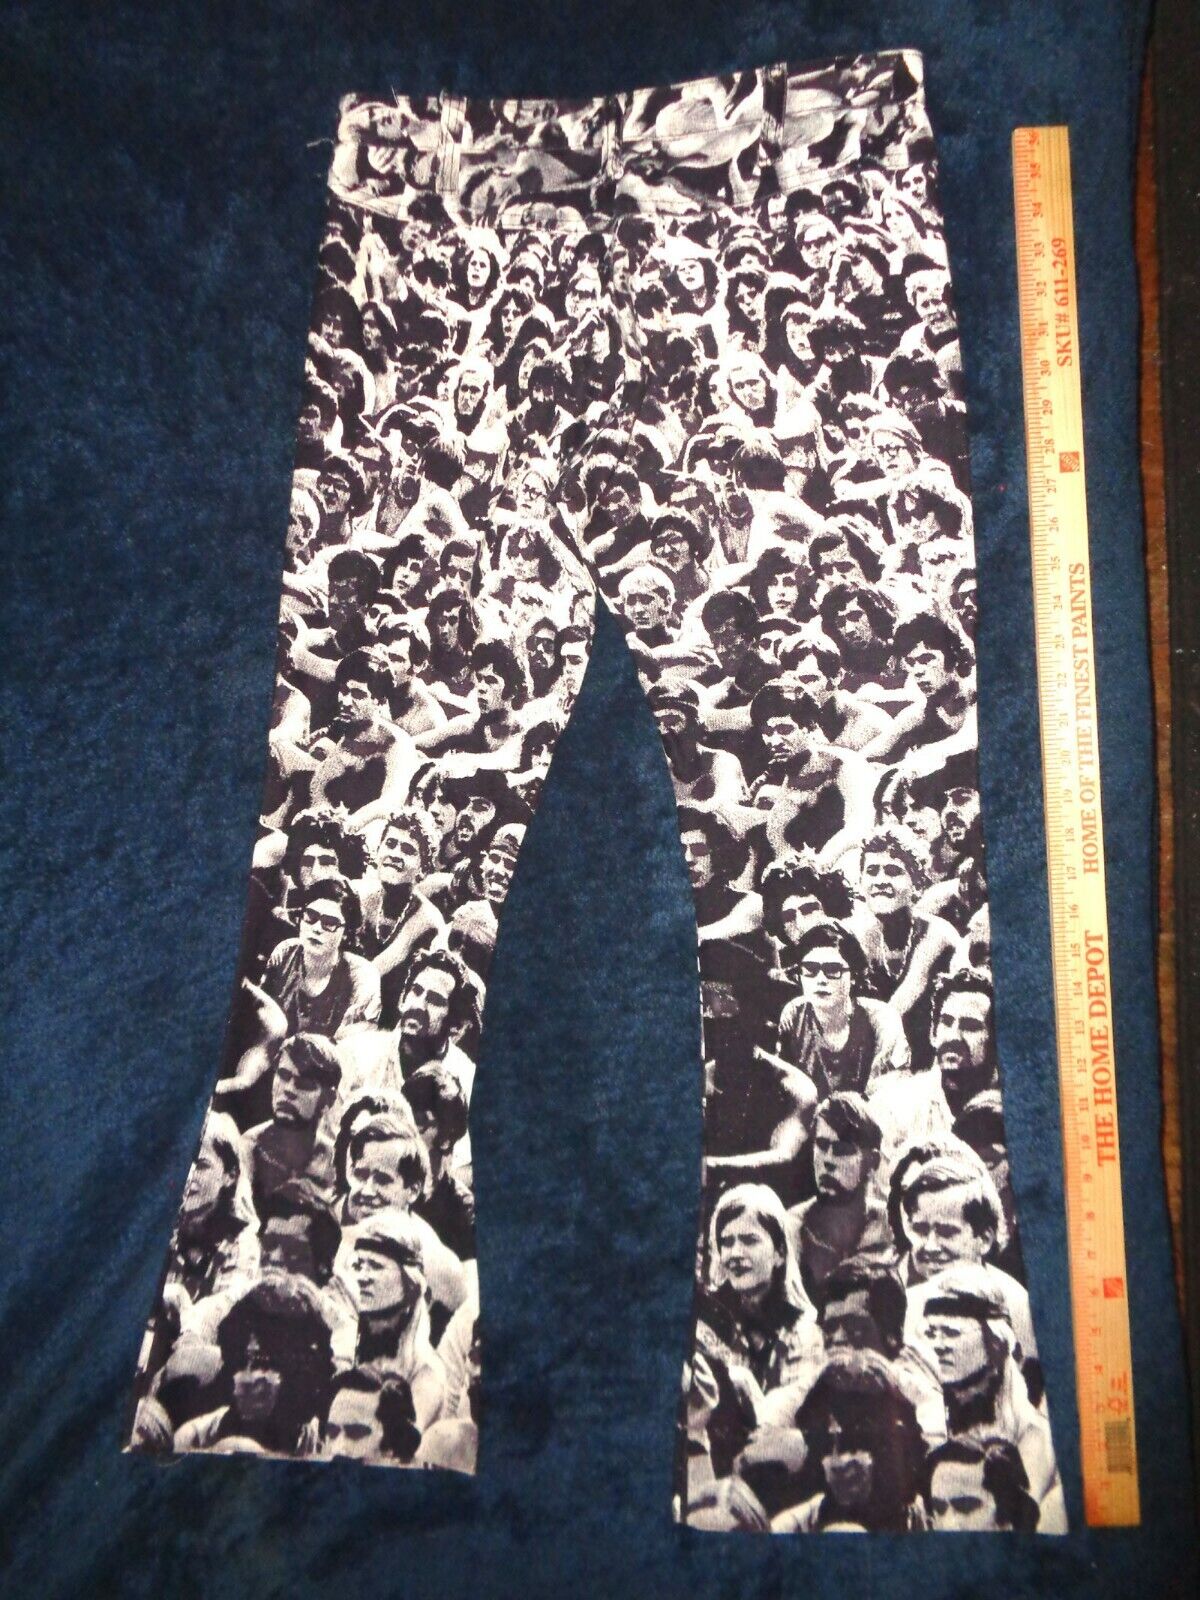 Woodstock bellbottom 1969 1970 collectible pants vintage Near Mint